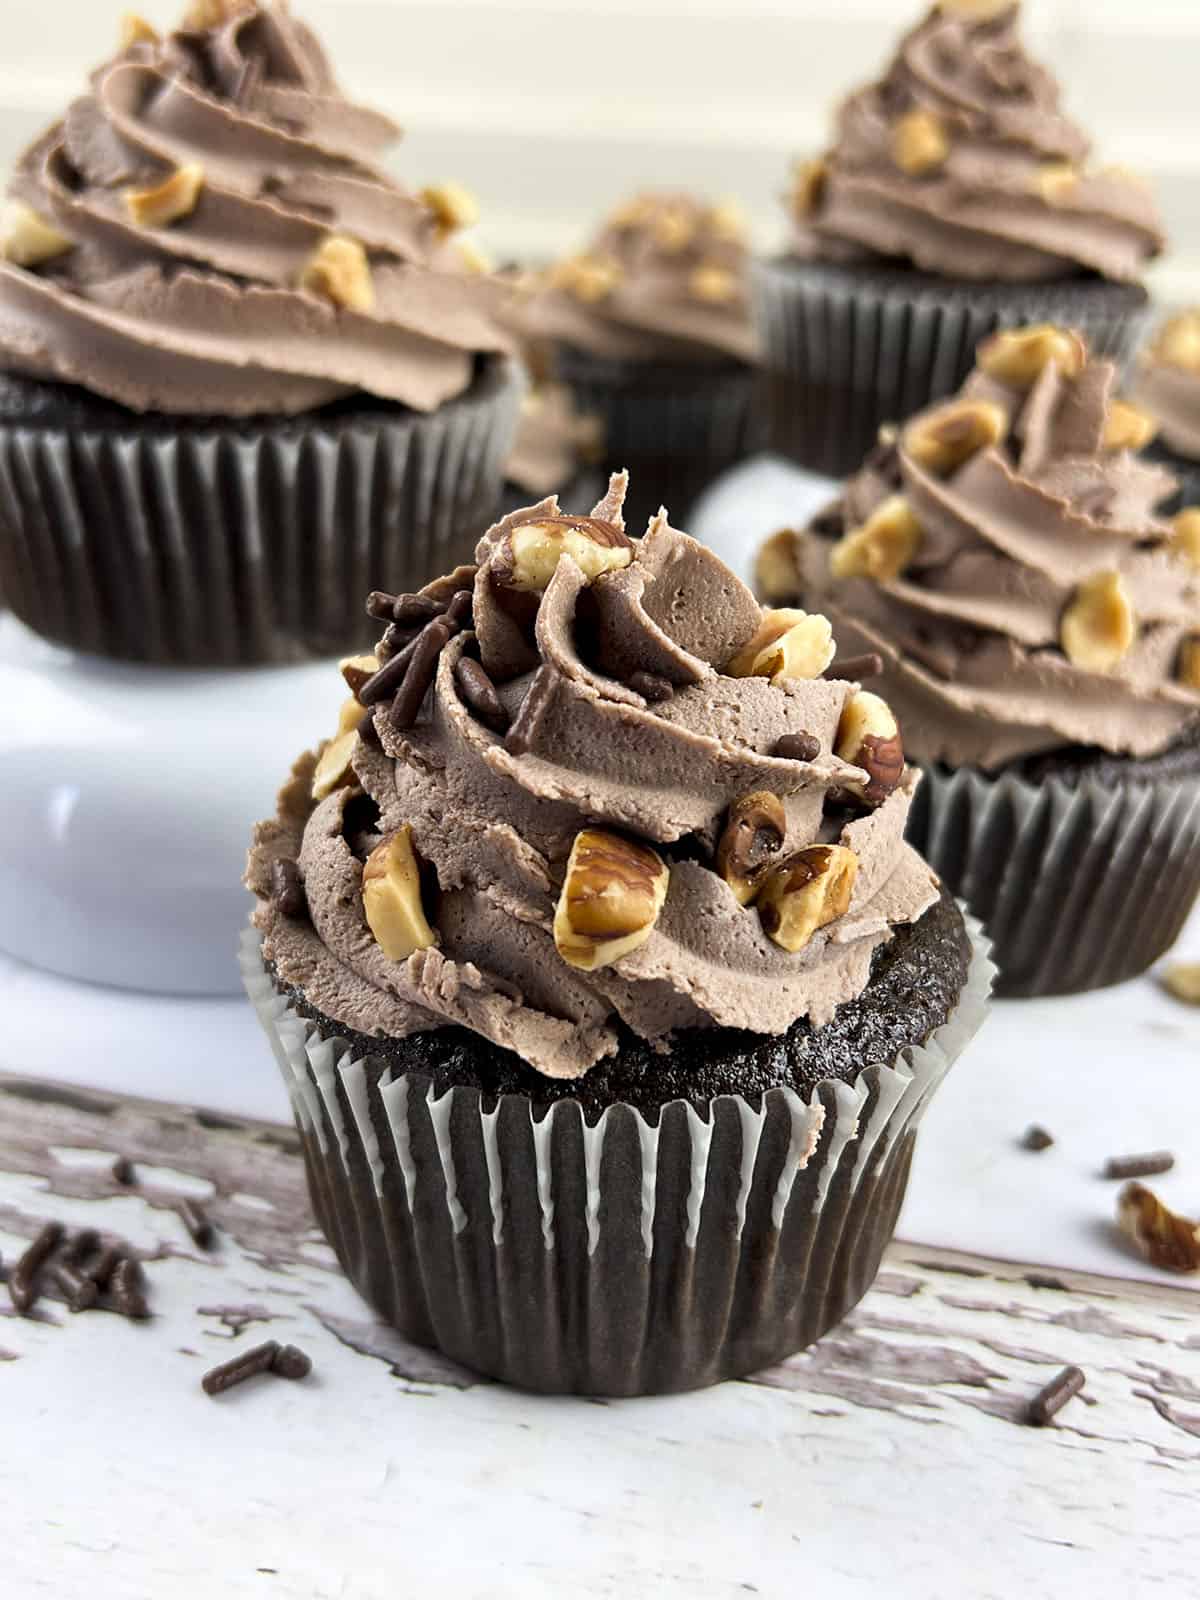 One nutella cupcake sits up front with other cupcakes in the back. The cupcake has nuts on the frosting.